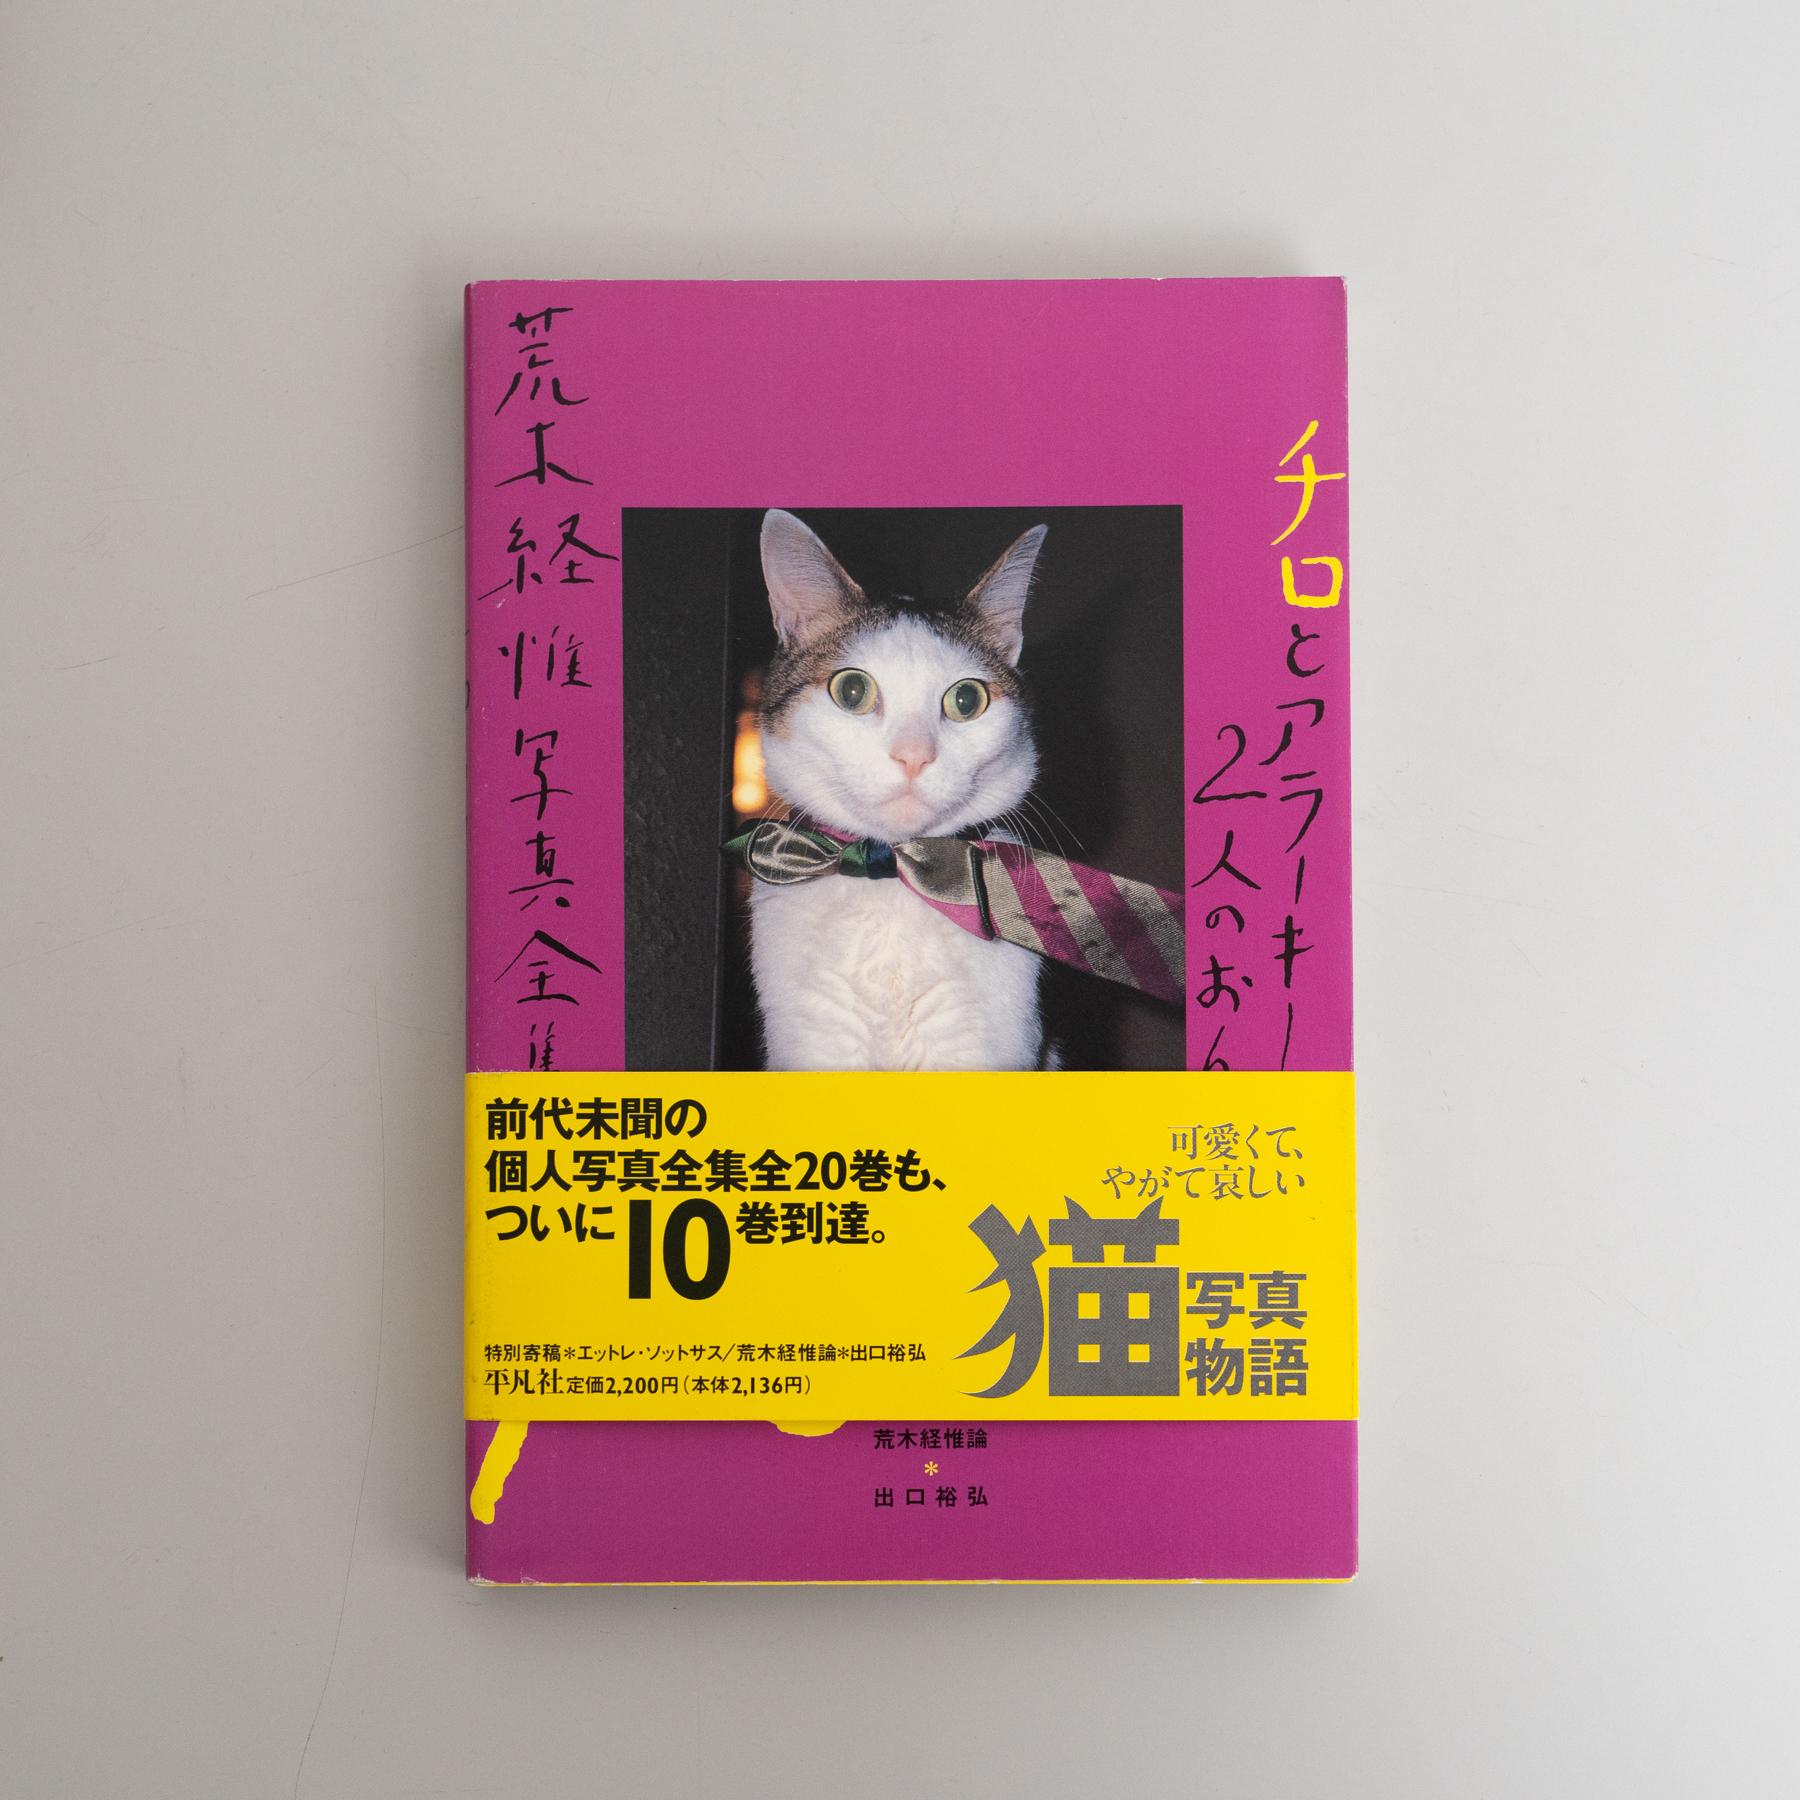 Signed Araki's Magnum Opus: Complete Book Collection 1-20 + Satchin and Mabo For Sale 8